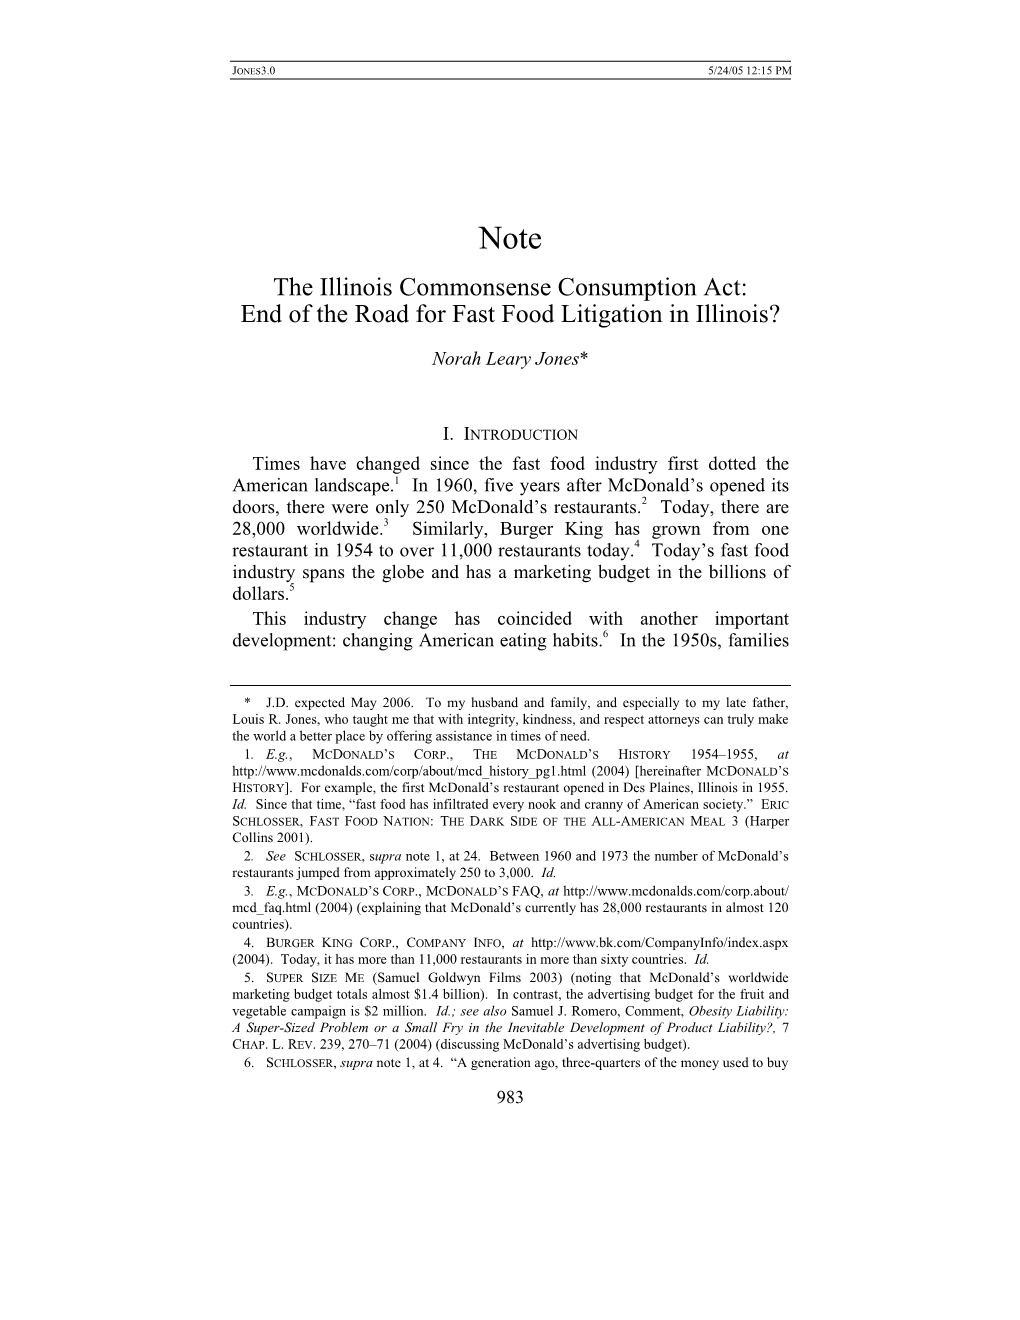 End of the Road for Fast Food Litigation in Illinois?